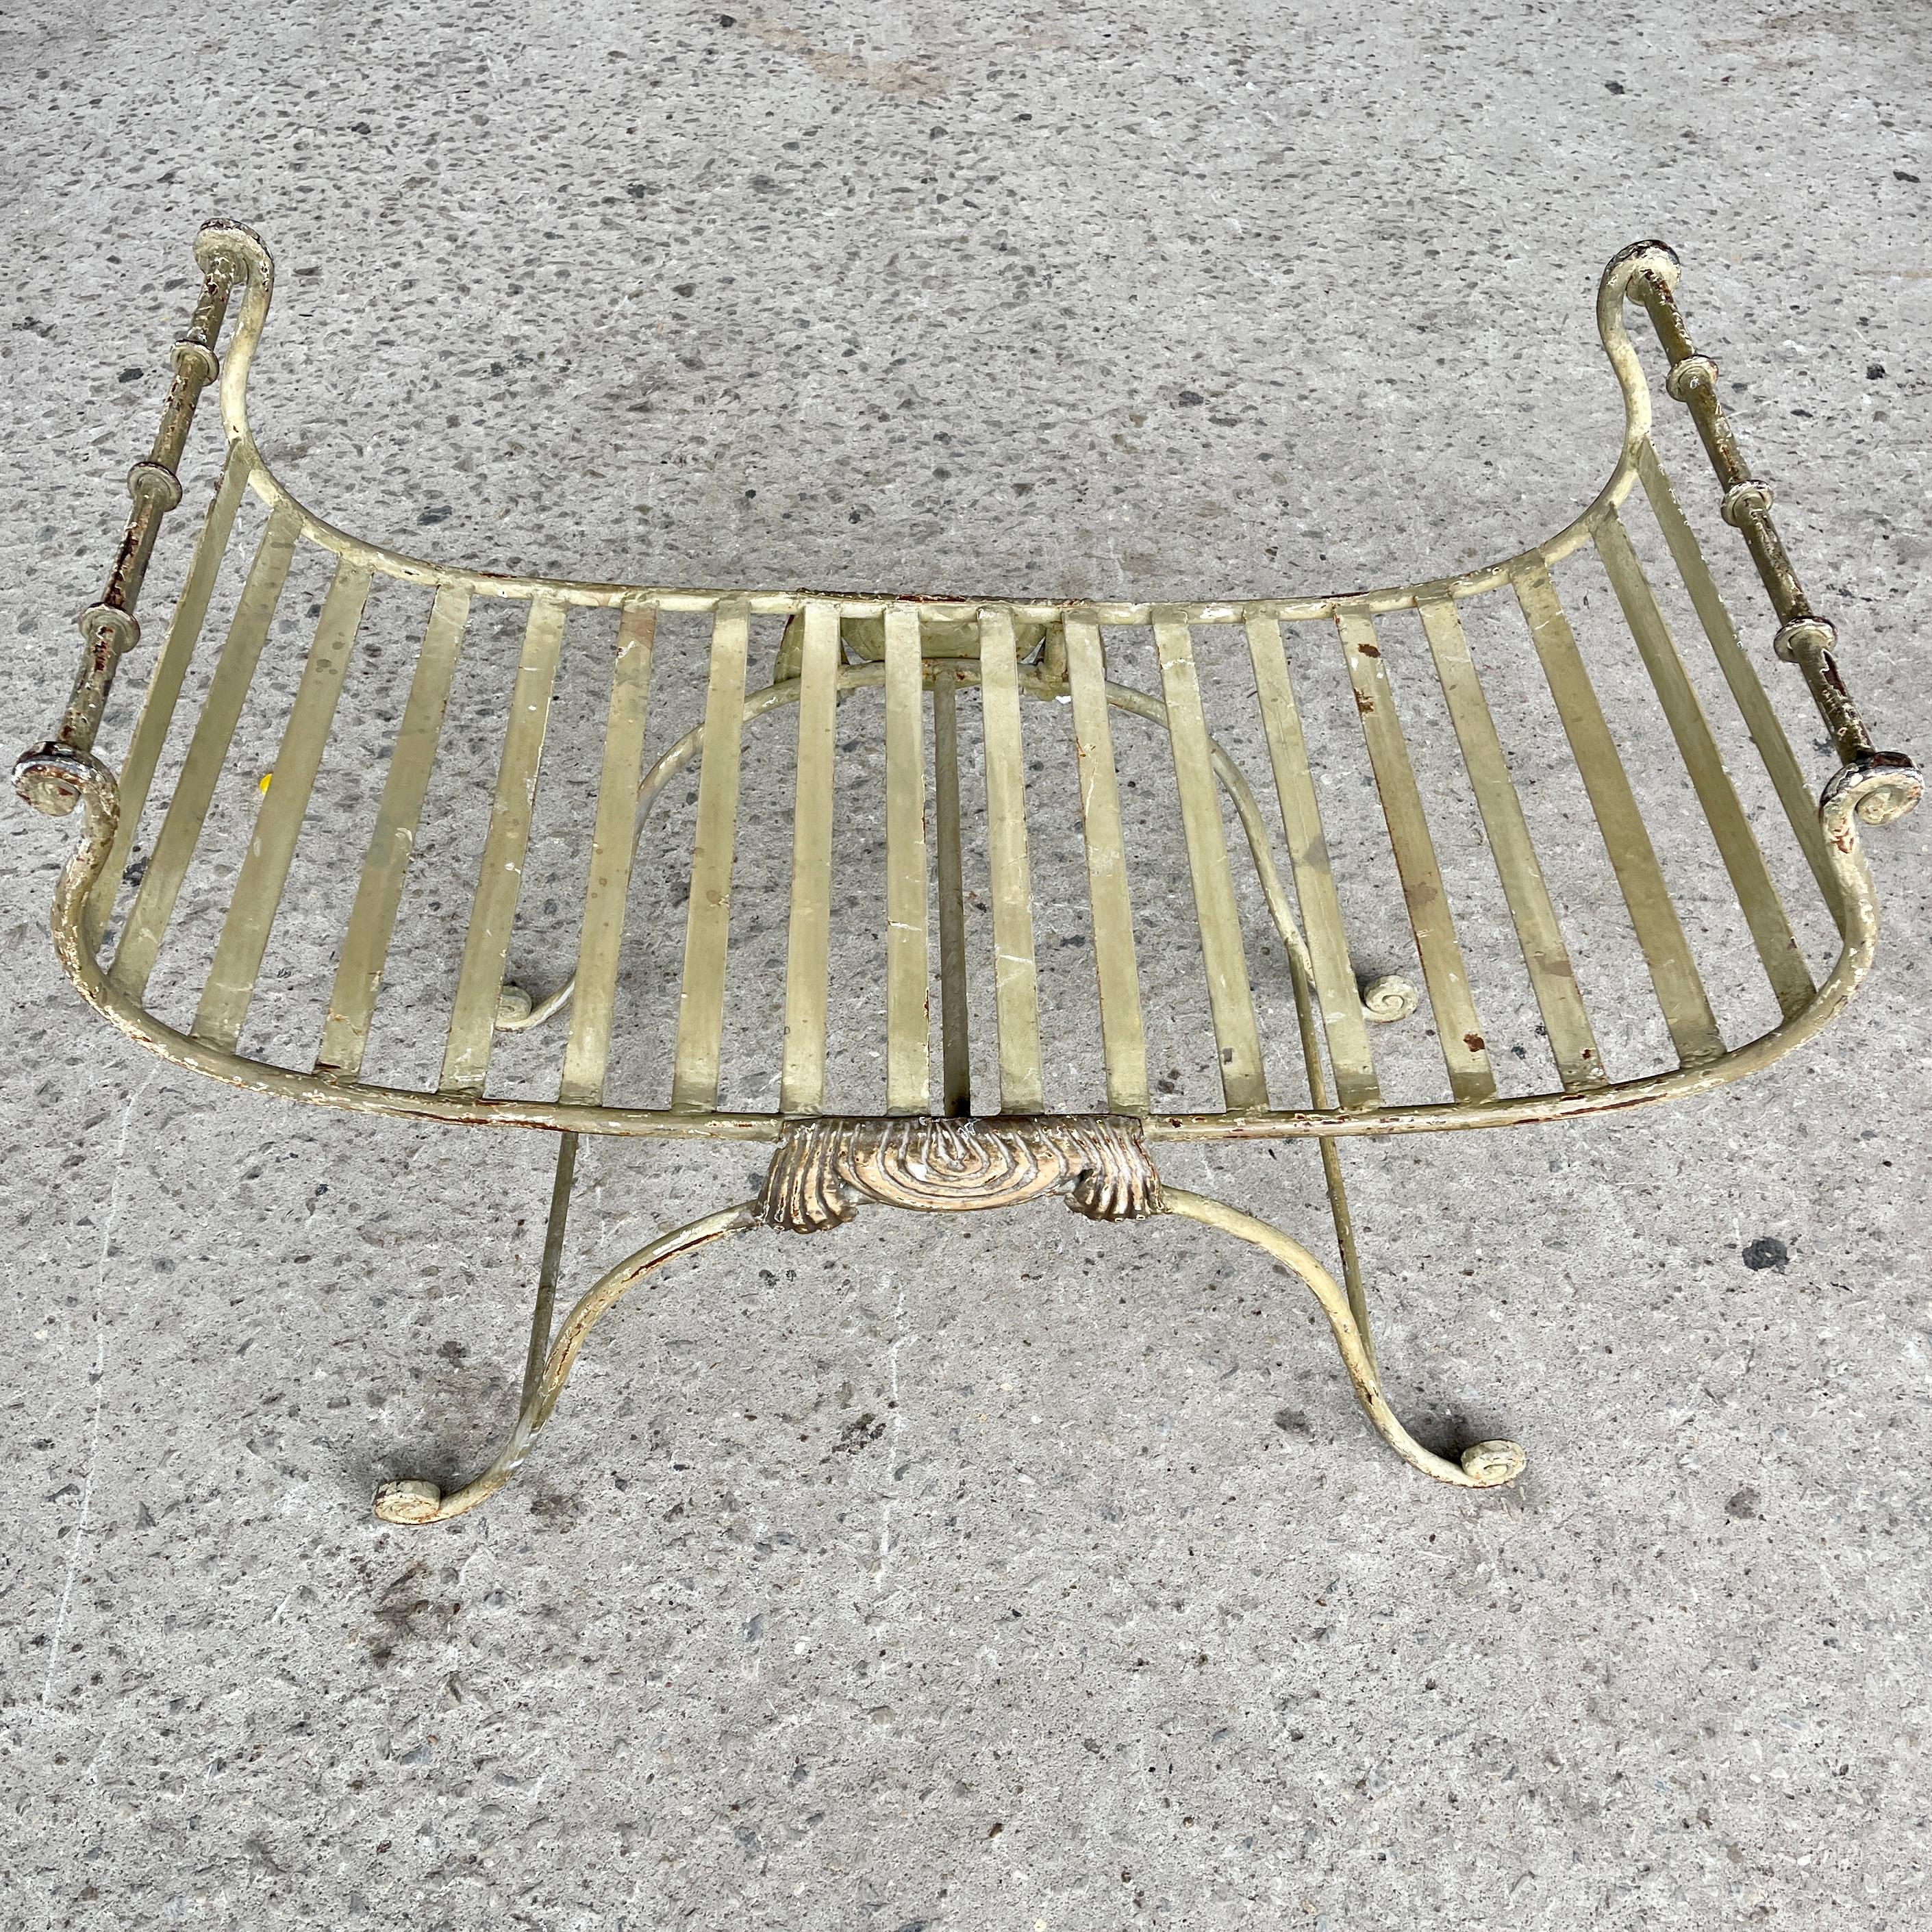 20th Century Large Wide Patio Garden Painted Iron Seat Bench, Circa 1930-1950 For Sale